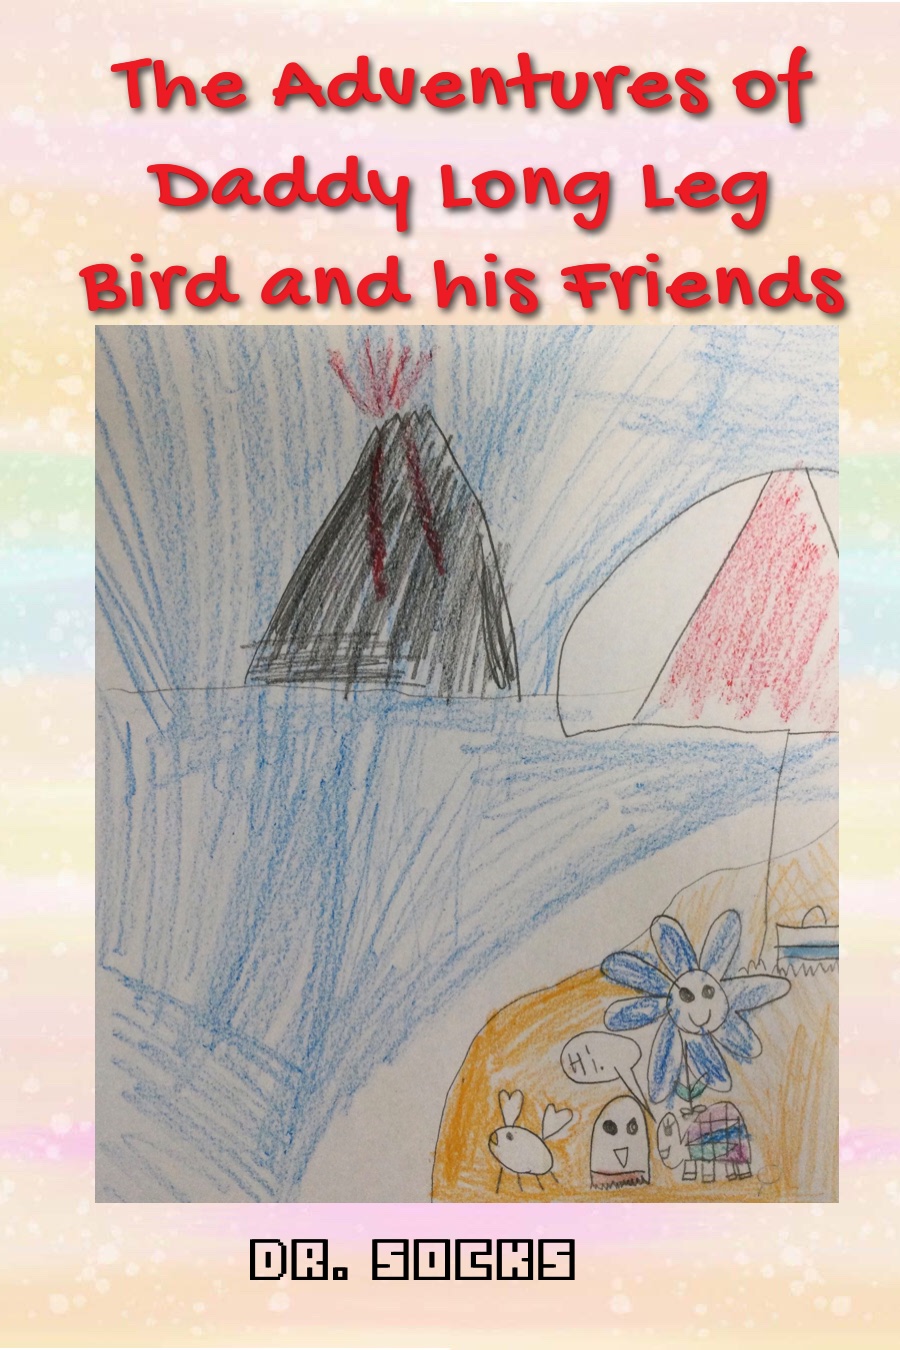 The Adventures of Daddy Long Leg Bird and His Friends by Millbrae – June 30 – 1st Grade